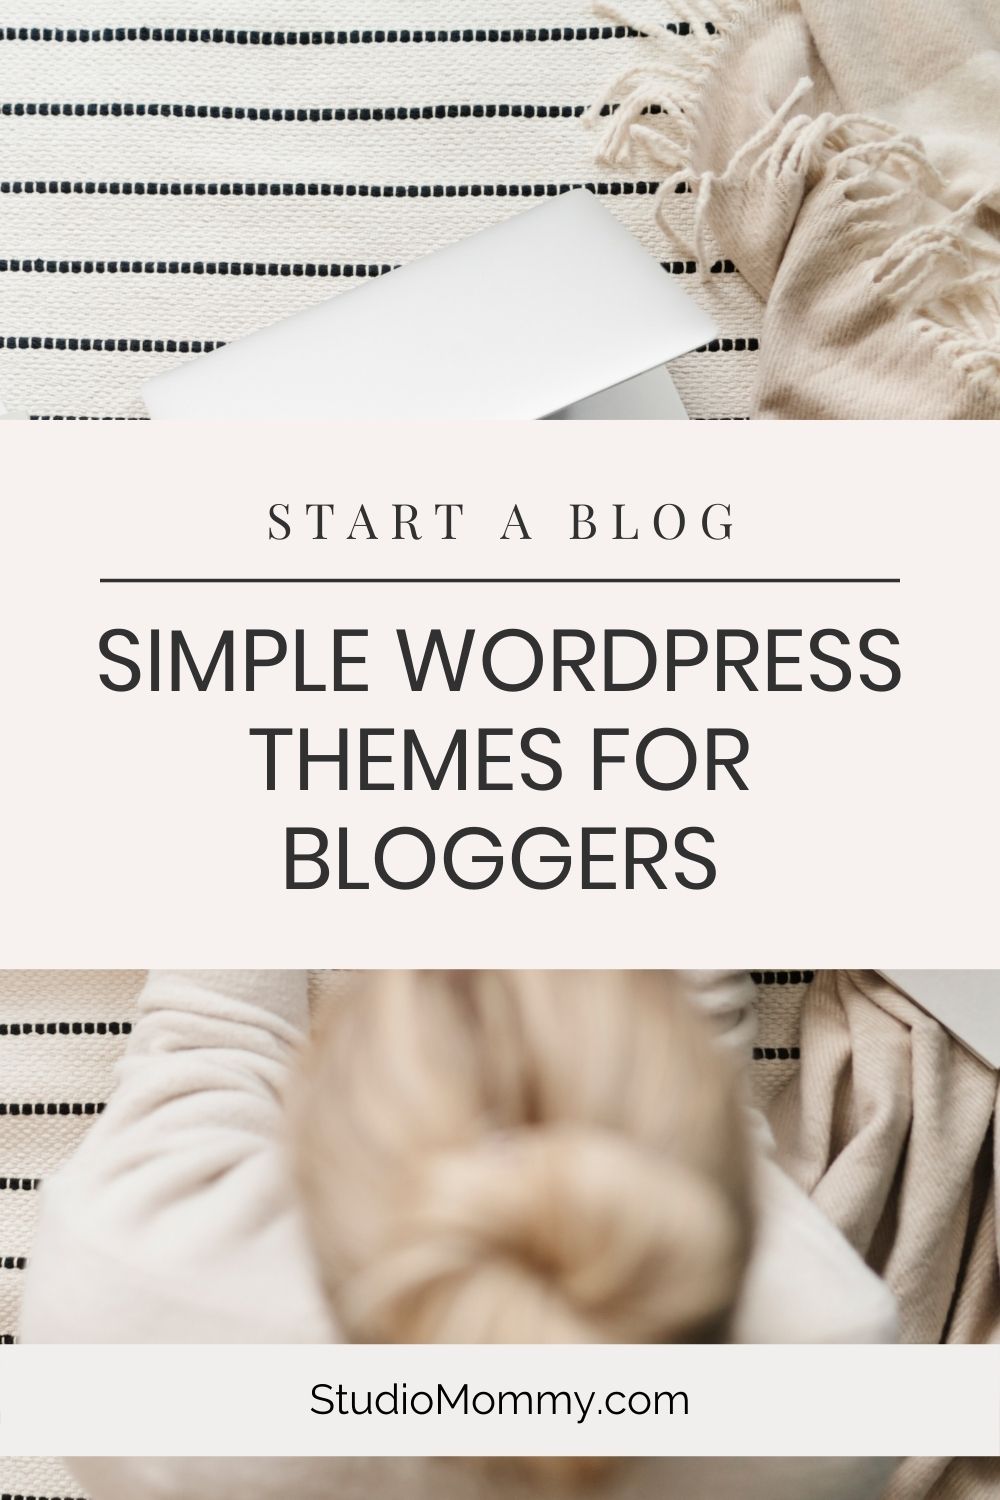 Are you contemplating starting a blog?  One of the essential steps in blog creation is choosing the perfect WordPress theme. And, at the same time, it needs to be easily customizable and user-friendly. It is also vital to create a recognizable brand. Here are a few tips regarding WordPress blog themes for bloggers.